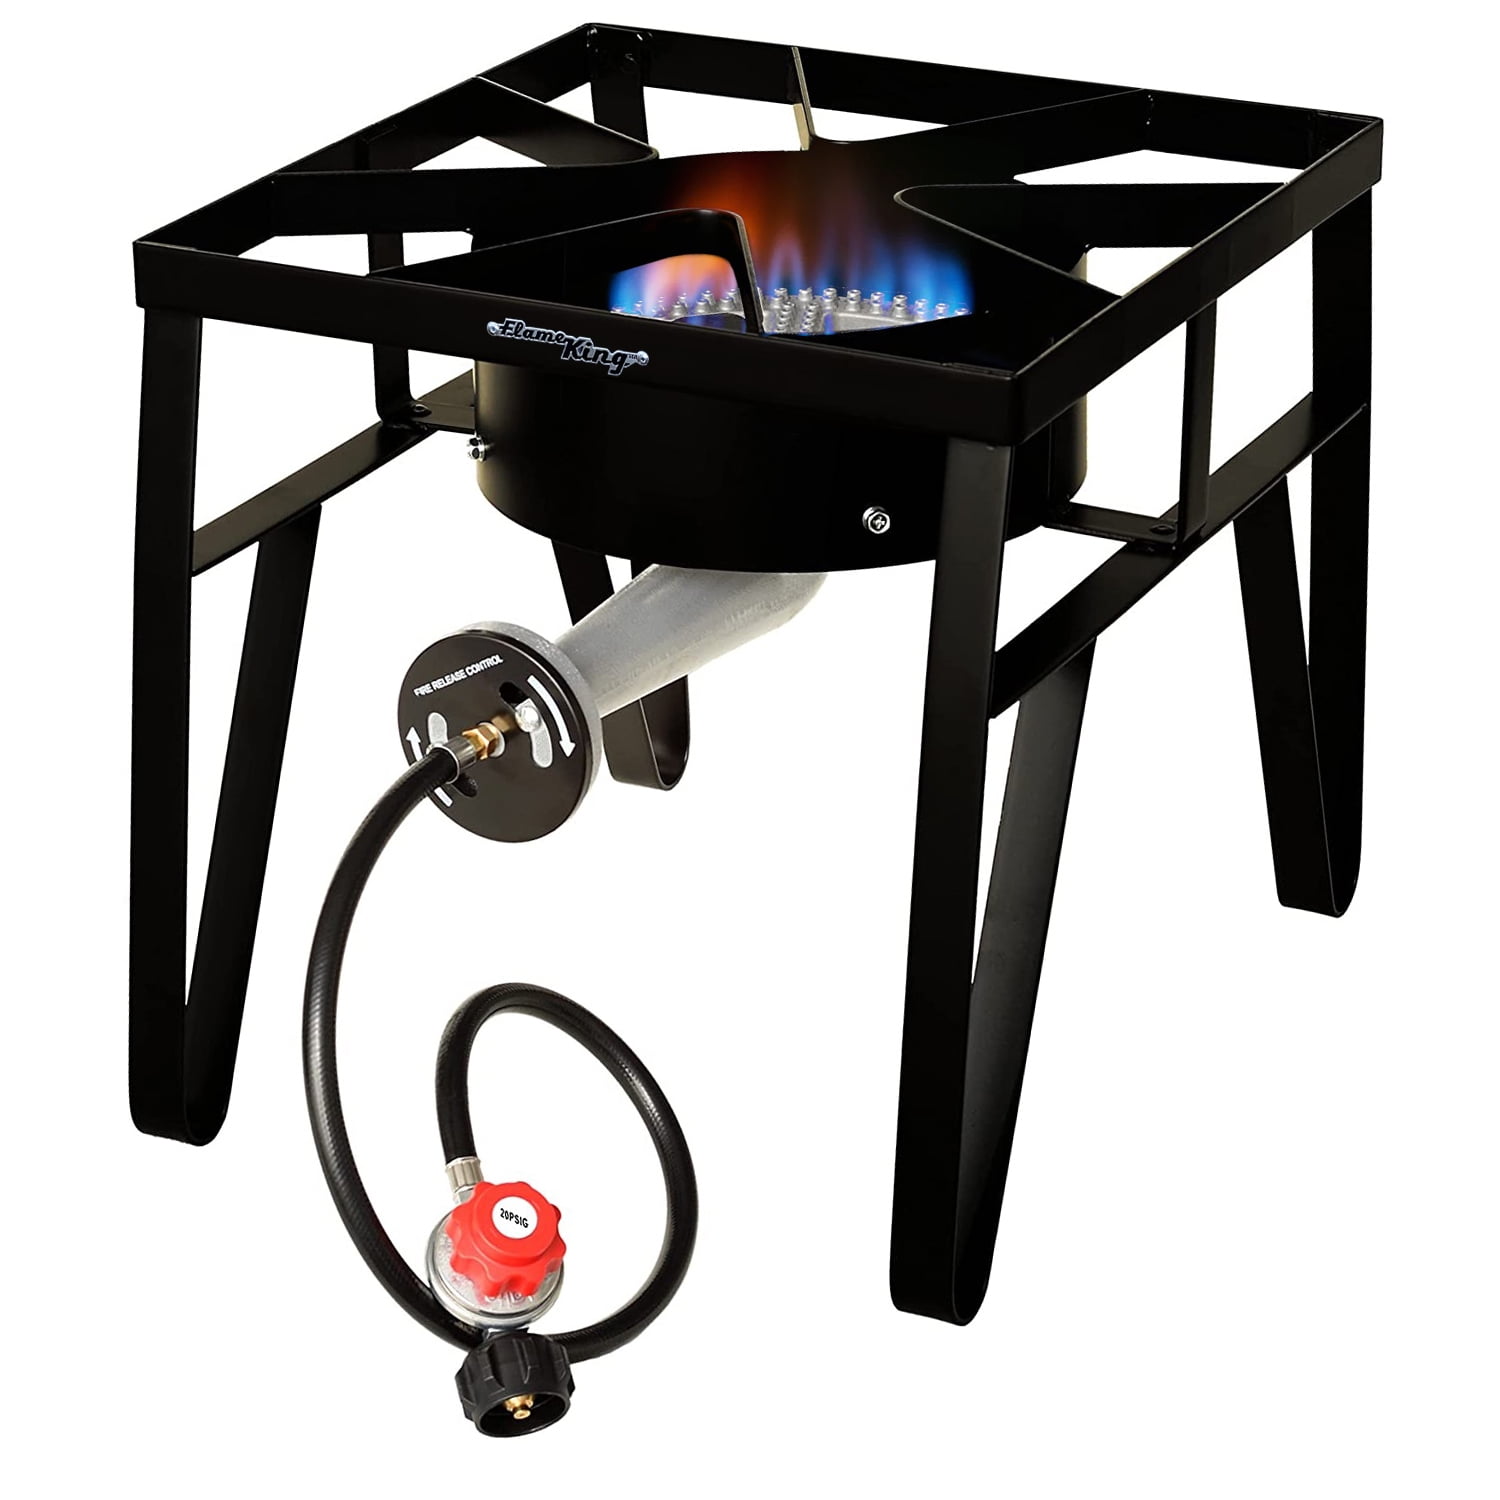 Single Propane Gas Burner Stove with Auto Ignition Tempered Glass Top Hose  & Regulator for Camping and Outdoor Cooking (One Burner)